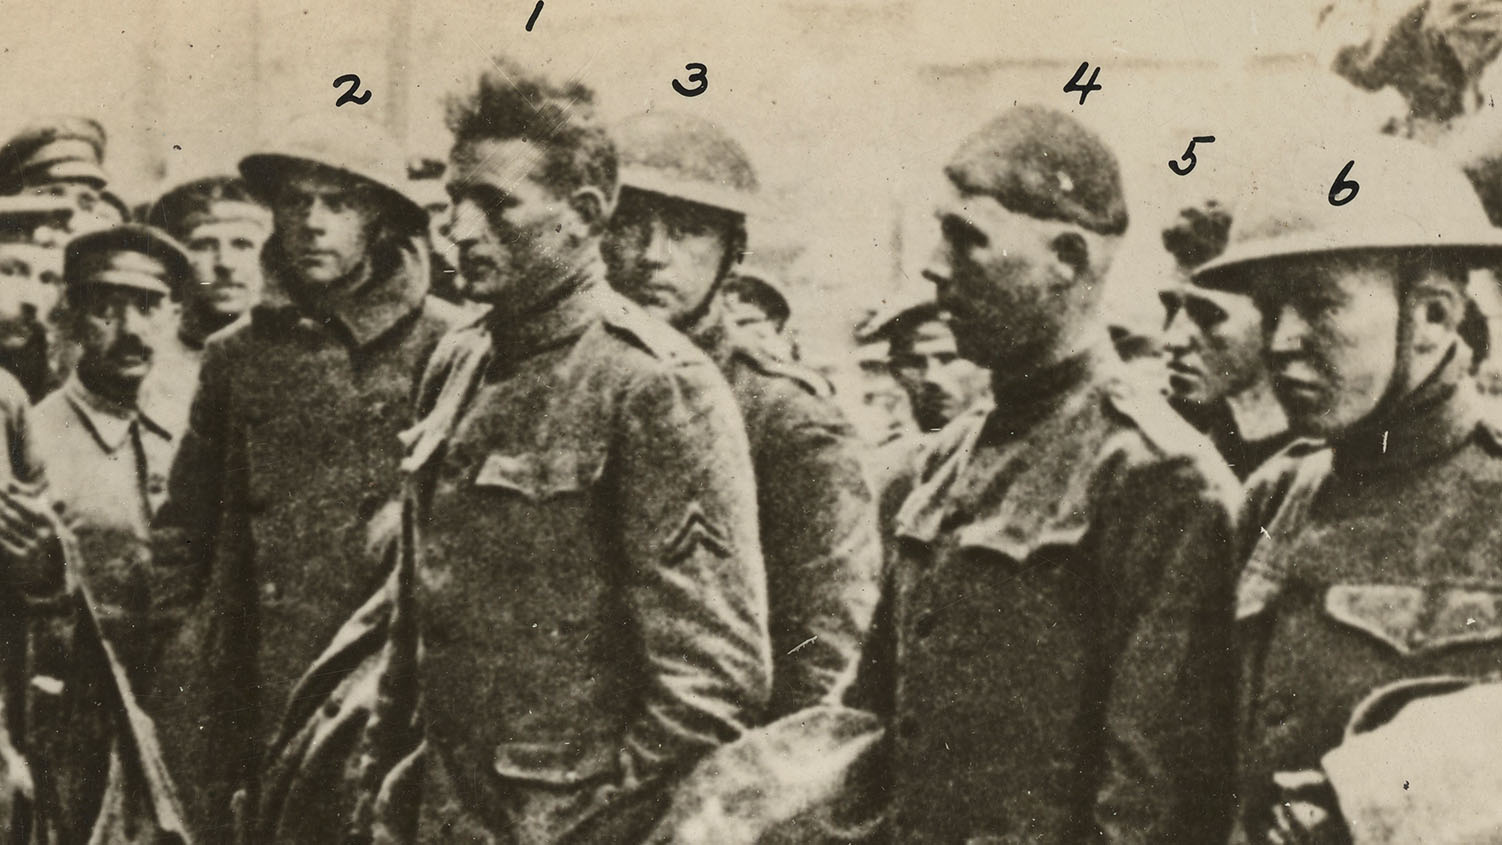 Pvt. Clyde Grimsley & Sgt. Halyburton with four other U.S. soldiers, photographed after capture in 1917, prior to transport to German prison camps. (National Archives & Records Administration)